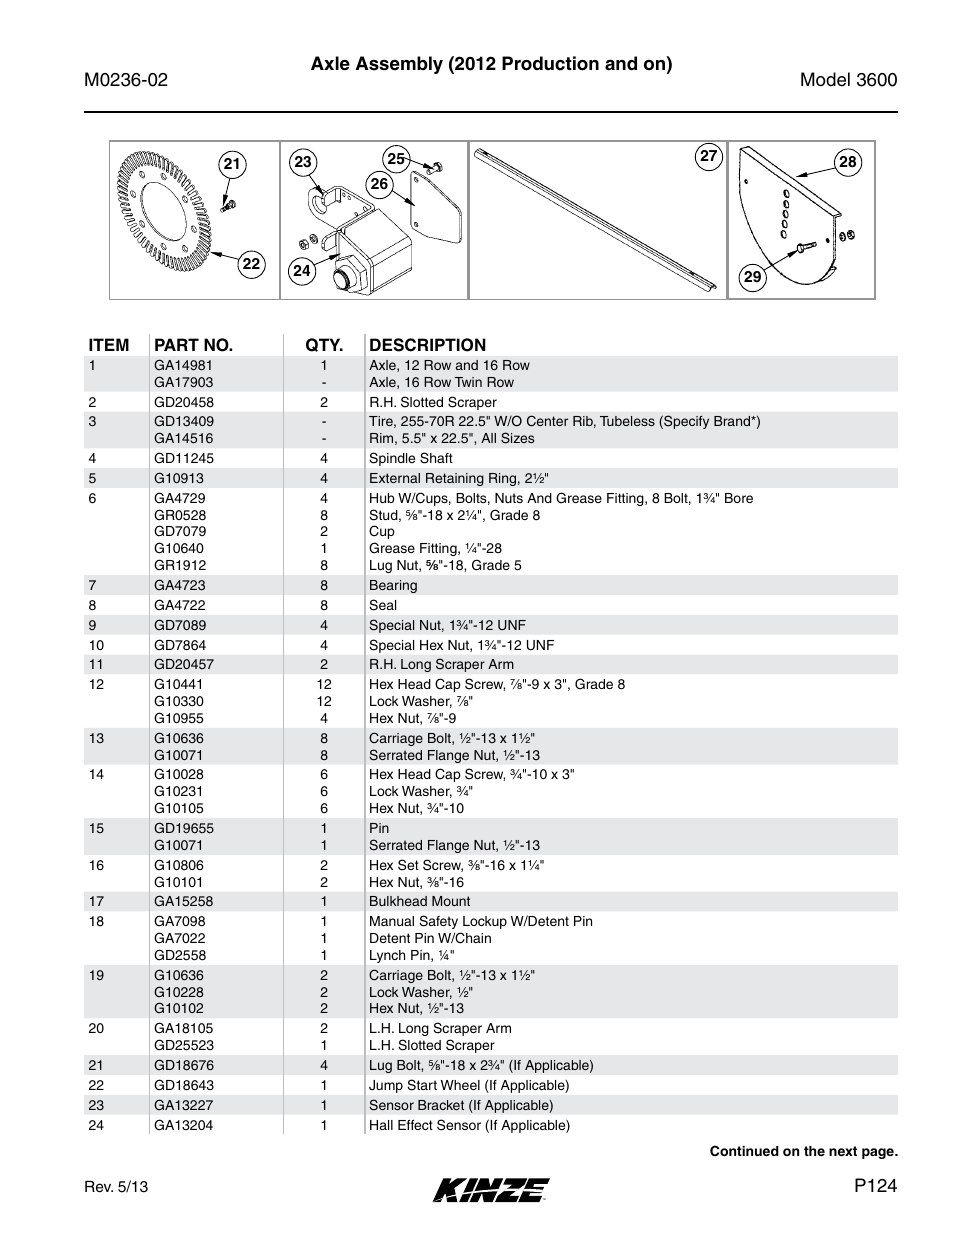 Axle assembly (2012 production and on), P124 | Kinze 3600 Lift and Rotate Planter Rev. 5/14 User Manual | Page 127 / 302